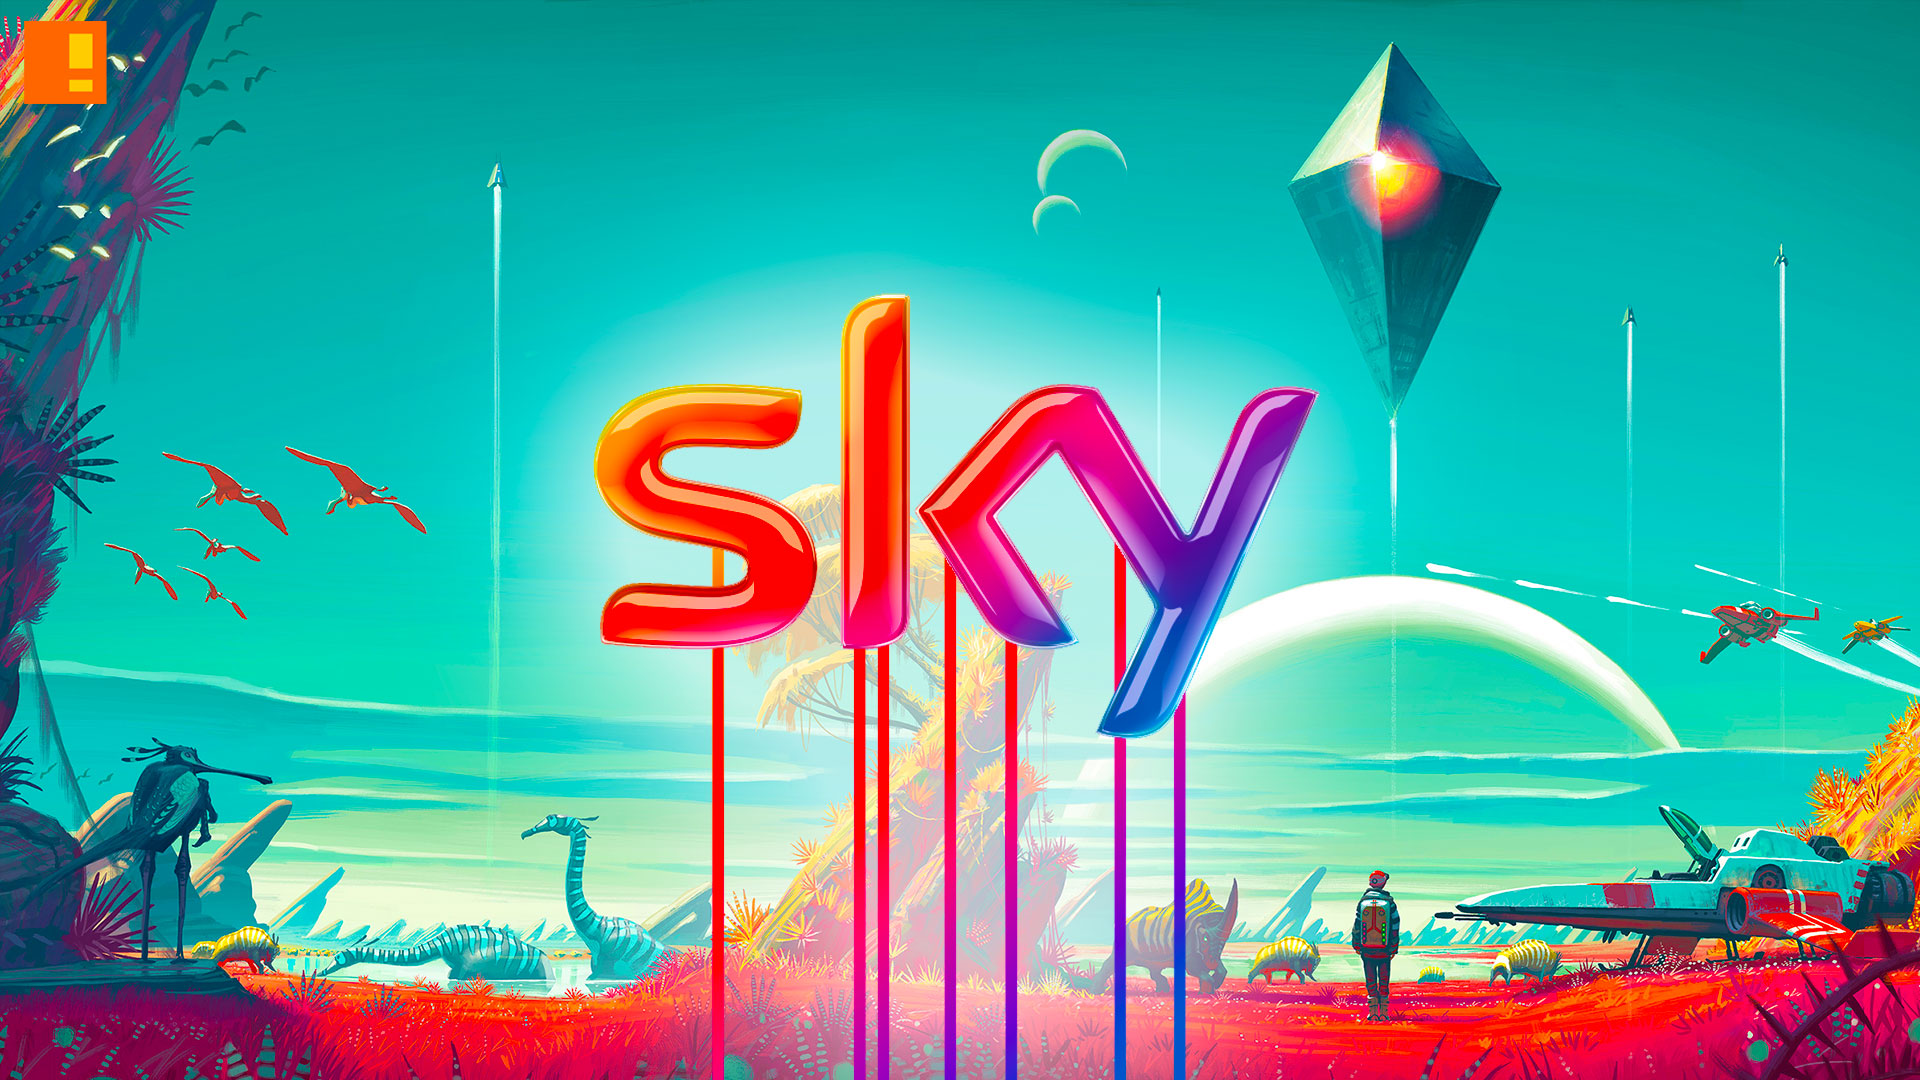 Only1sky